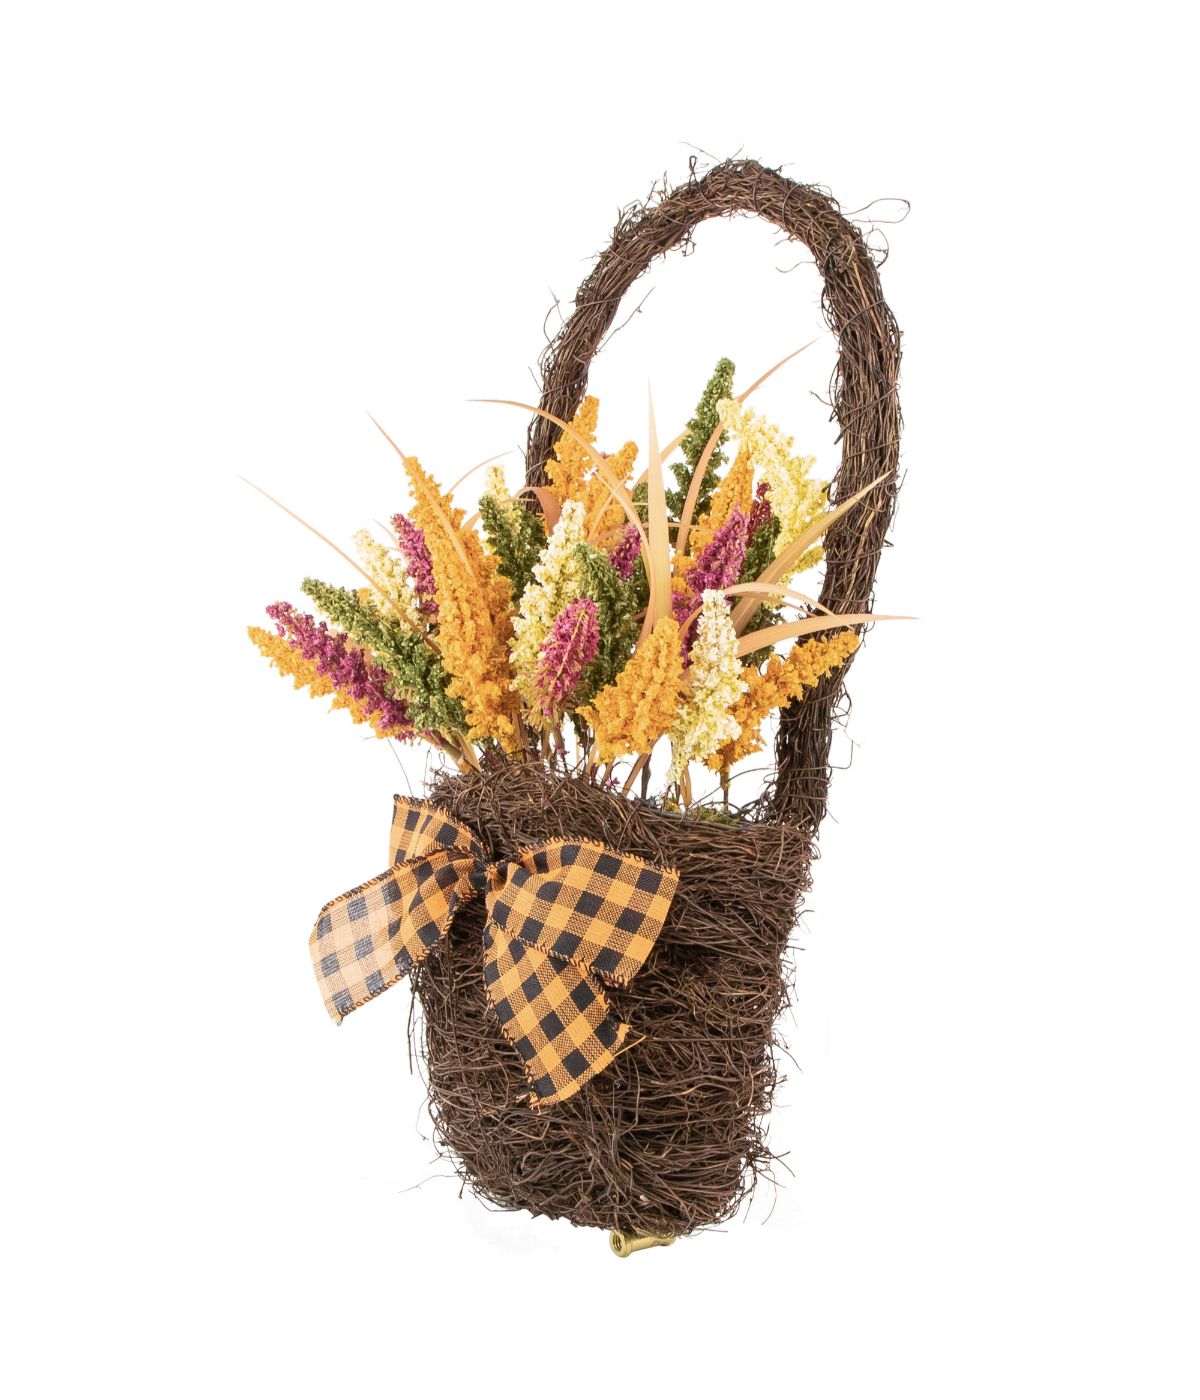 Autumn Harvest Hanging Basket with Artificial Fall Foliage Orange